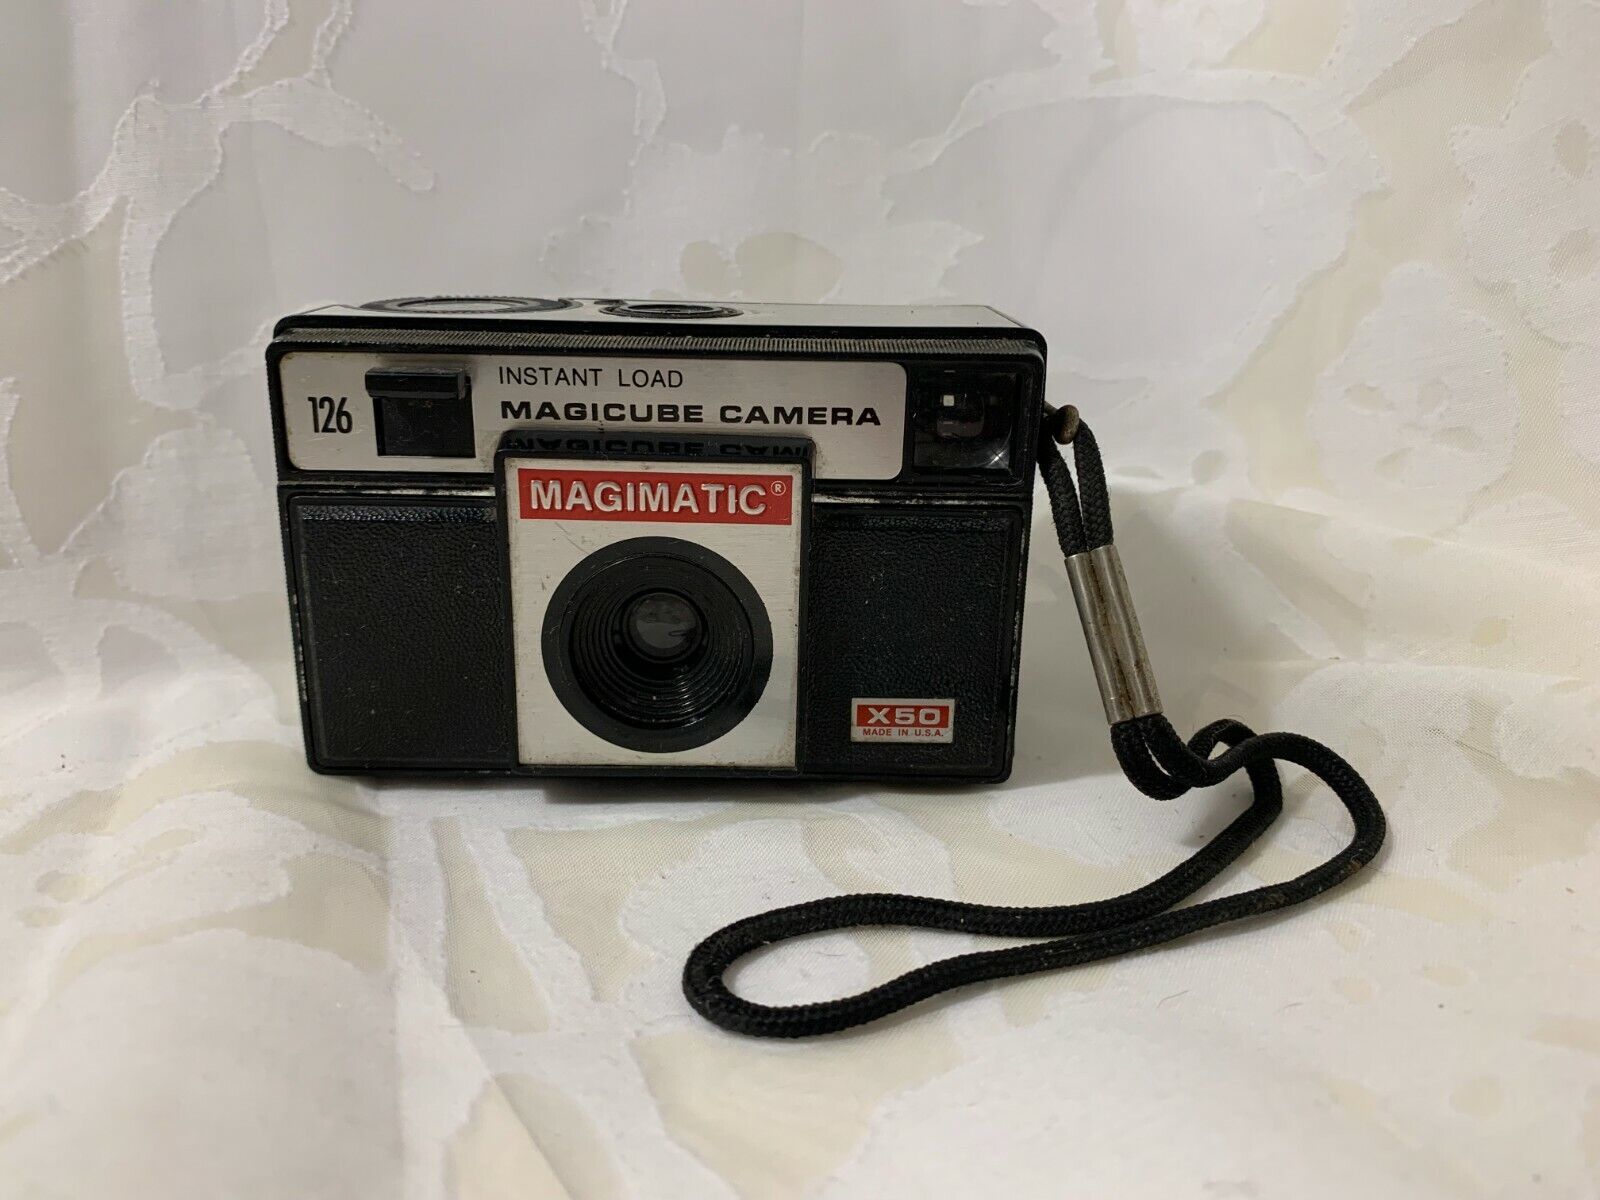 Vintage 126 Instant Load Magicube Camera X50 Made in USA Imperial Camera Corp. - $10.79